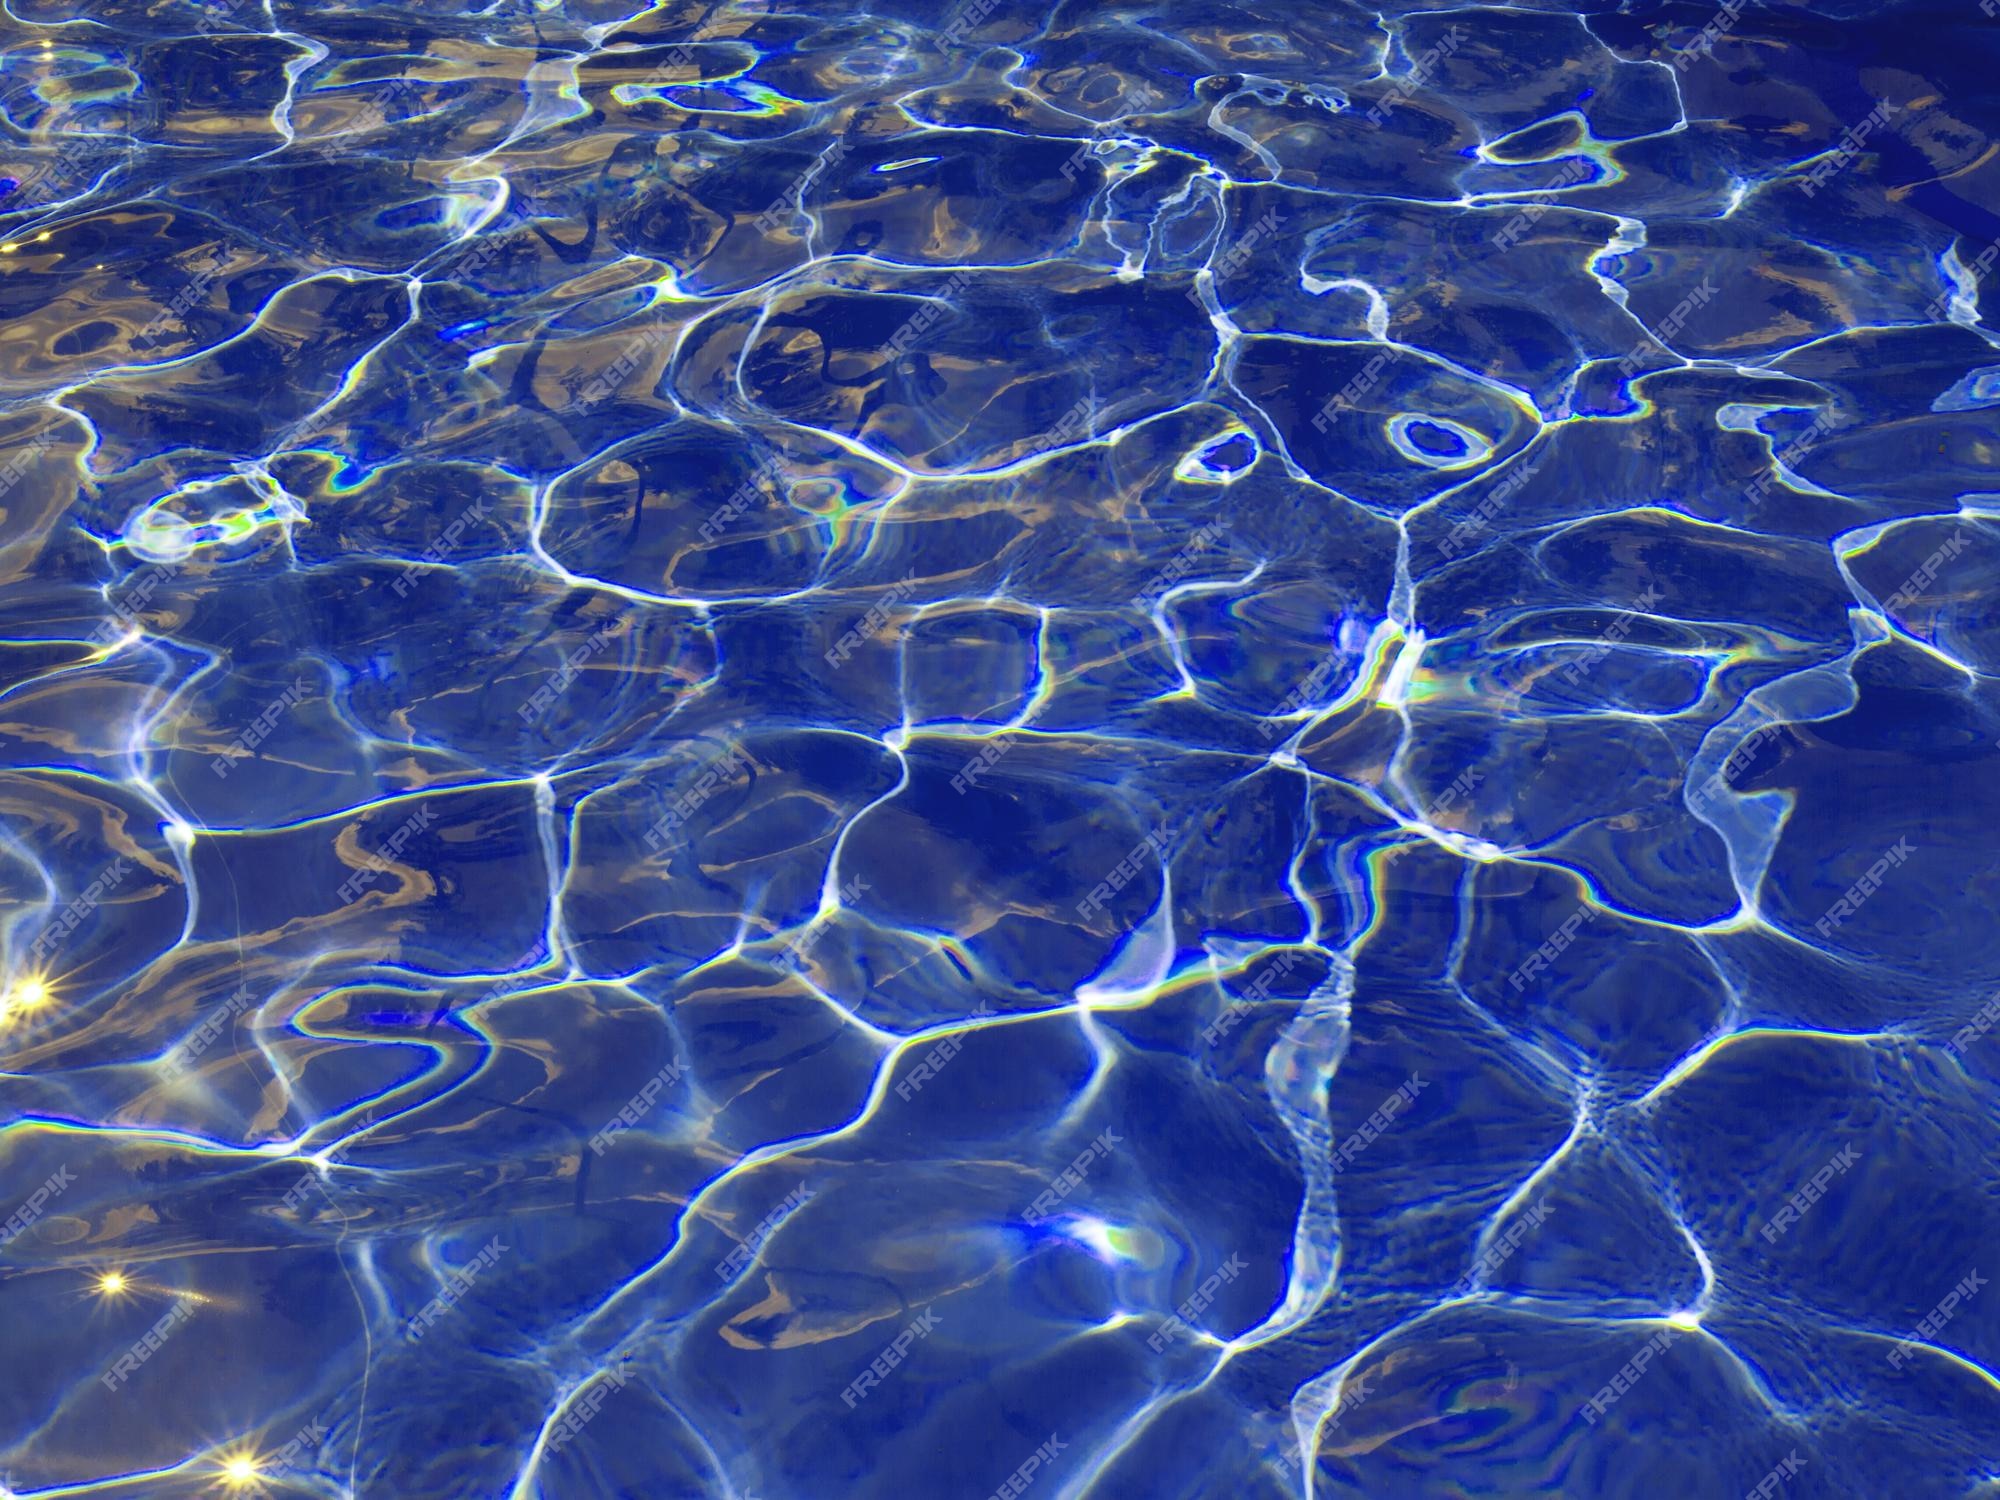 Premium Photo | Abstract blue texture of swimming pool water with ...